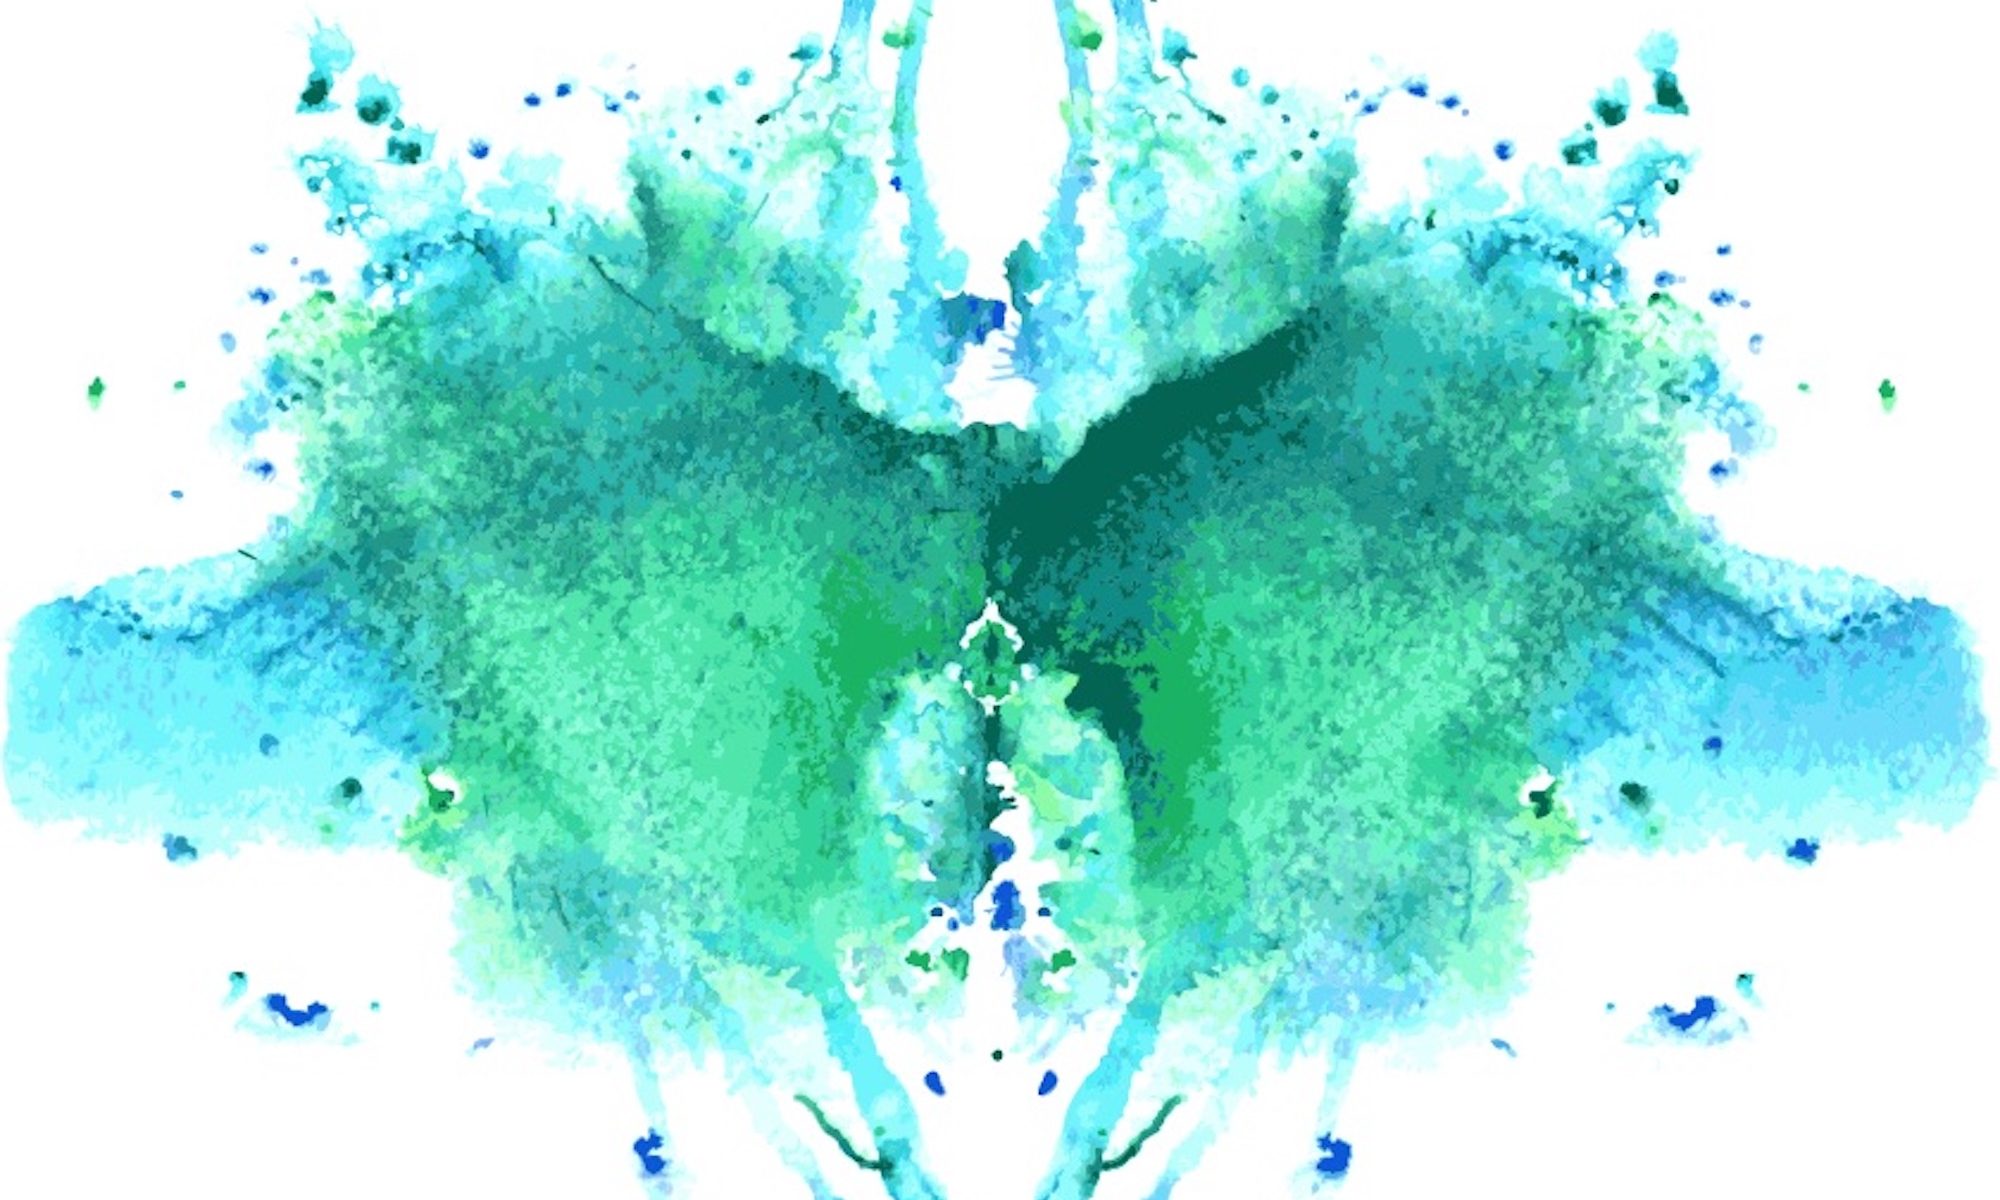 blue and green Rorschach image